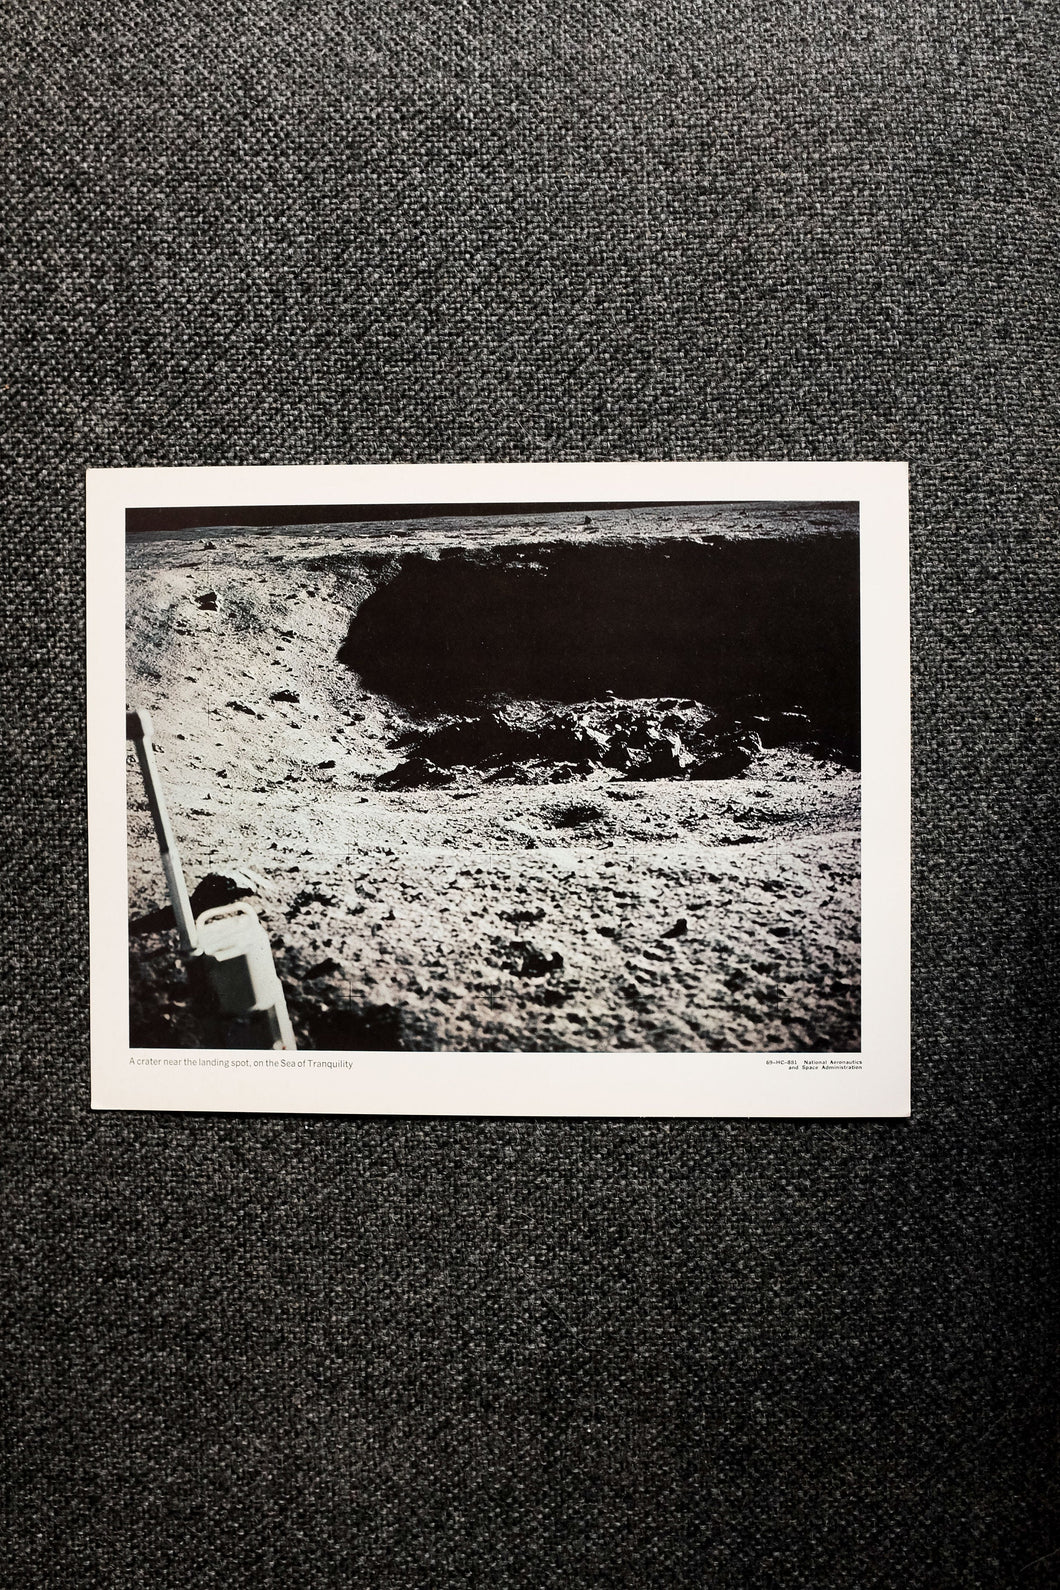 Large Nasa Print Crater Near Sea of Tranquility Photo